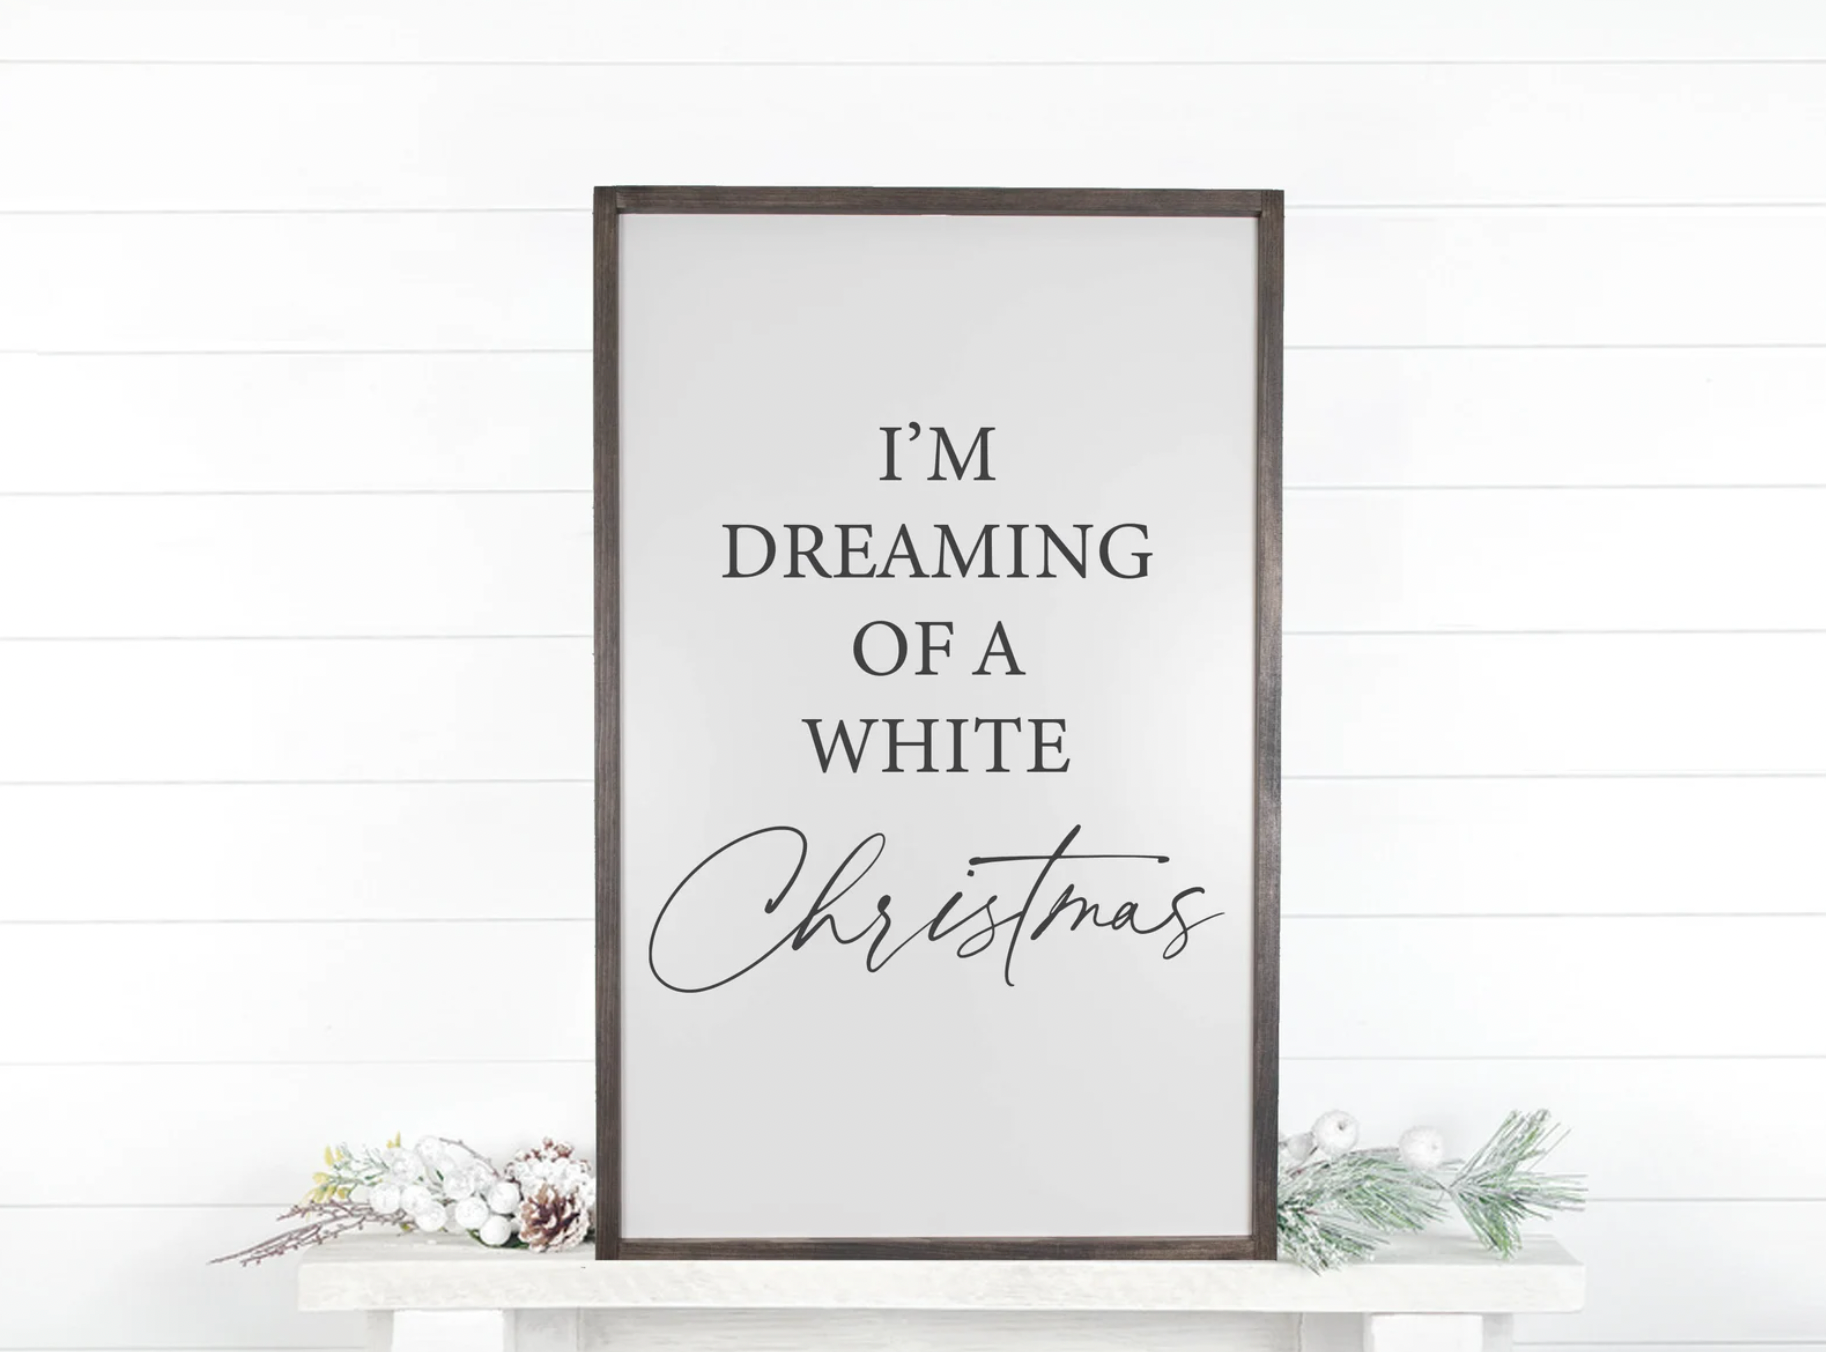 Dreaming of a White Christmas Wooden Christmas Decor Sign